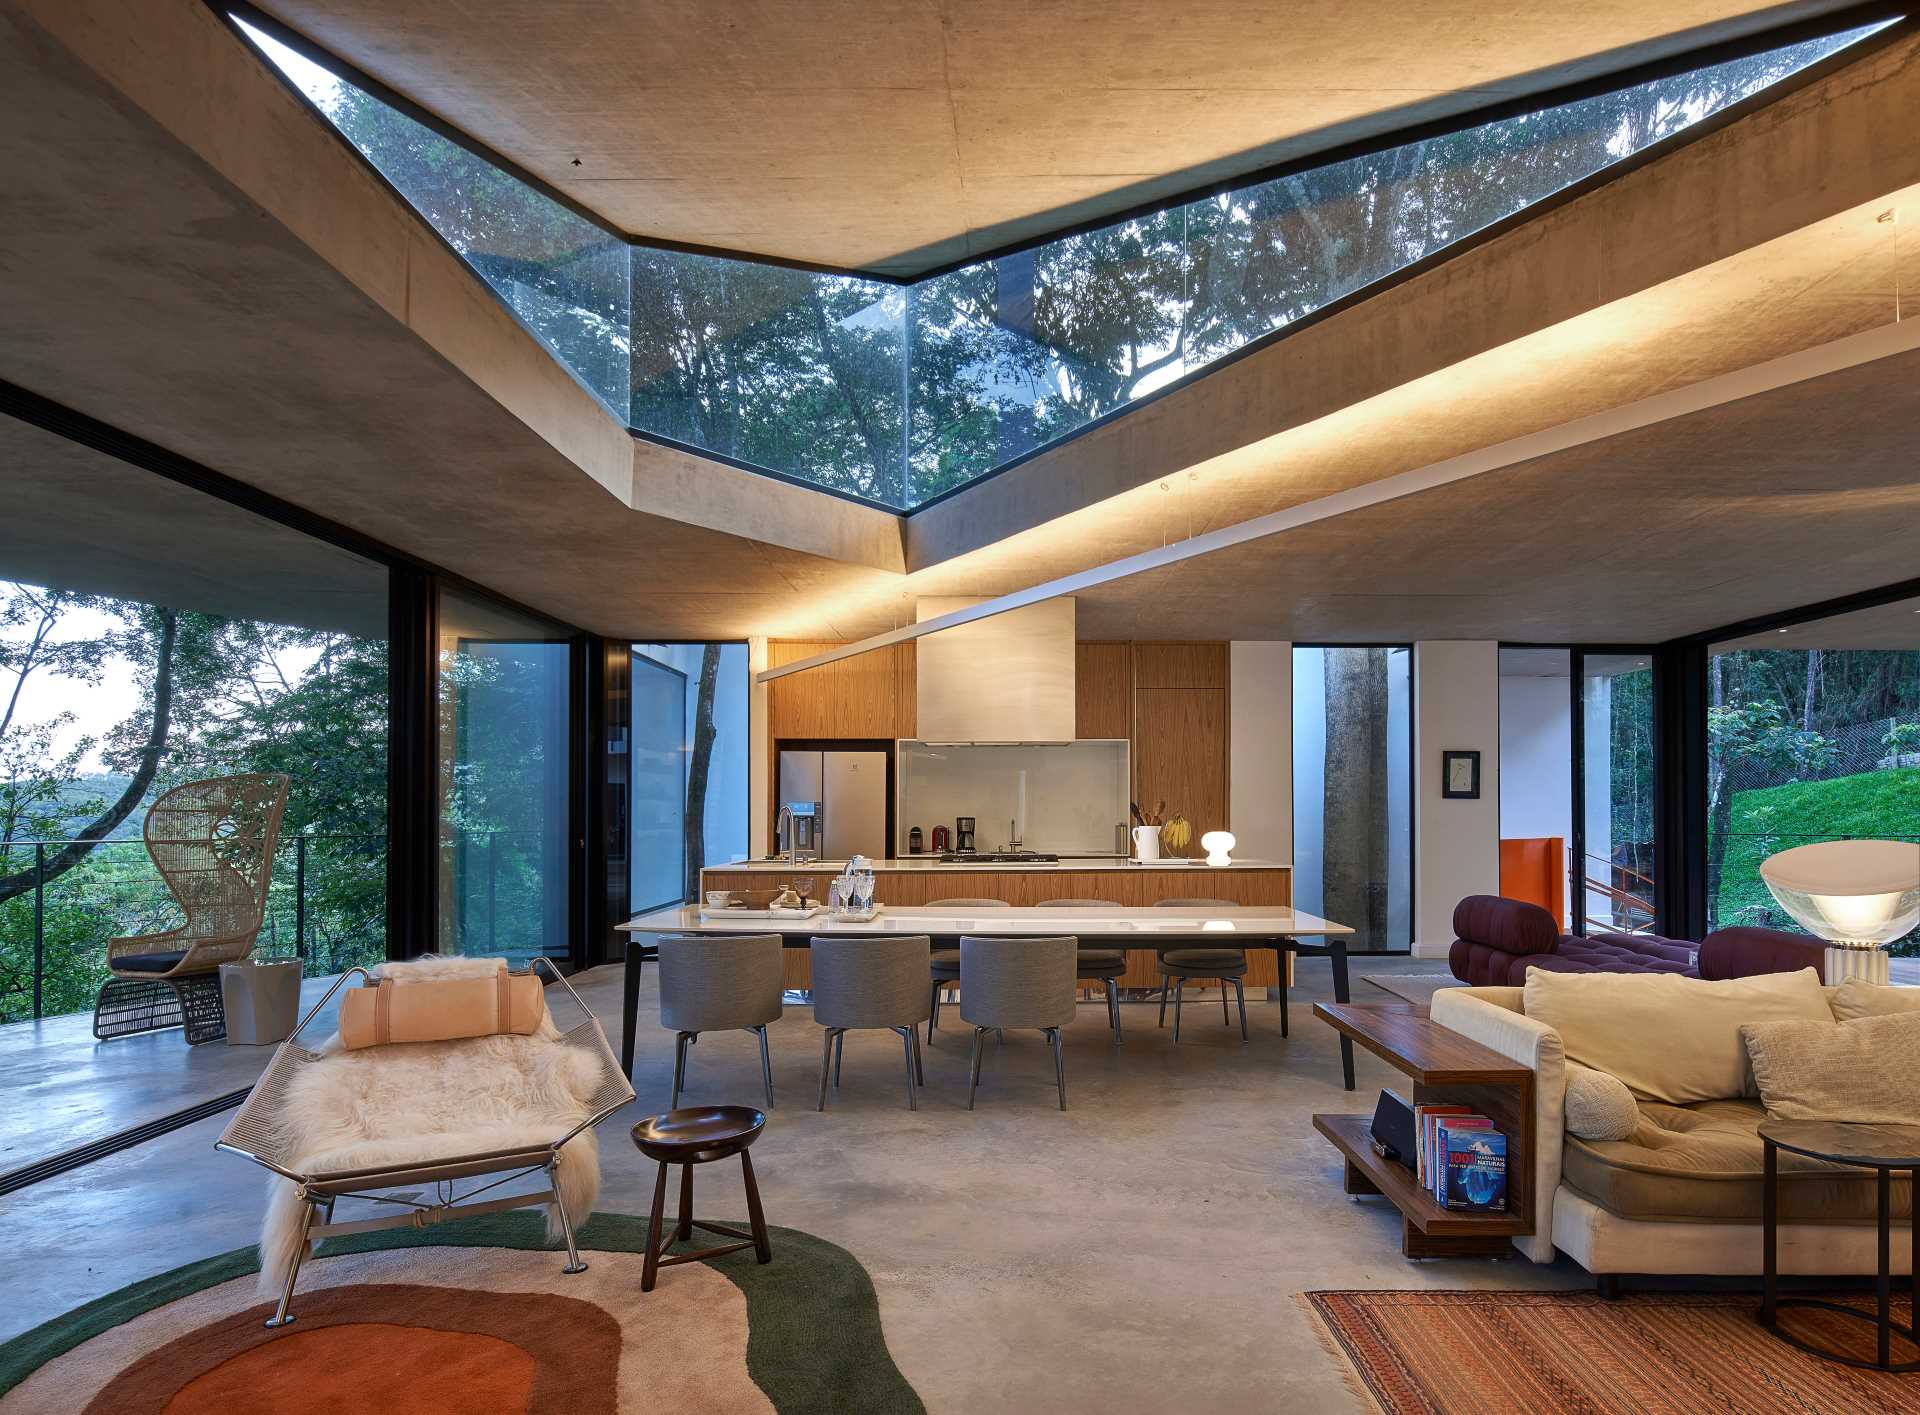 Inside this modern home, the angular design is highlighted by lighting and window shapes, while the living, dining, and kitchen all share the same open space.